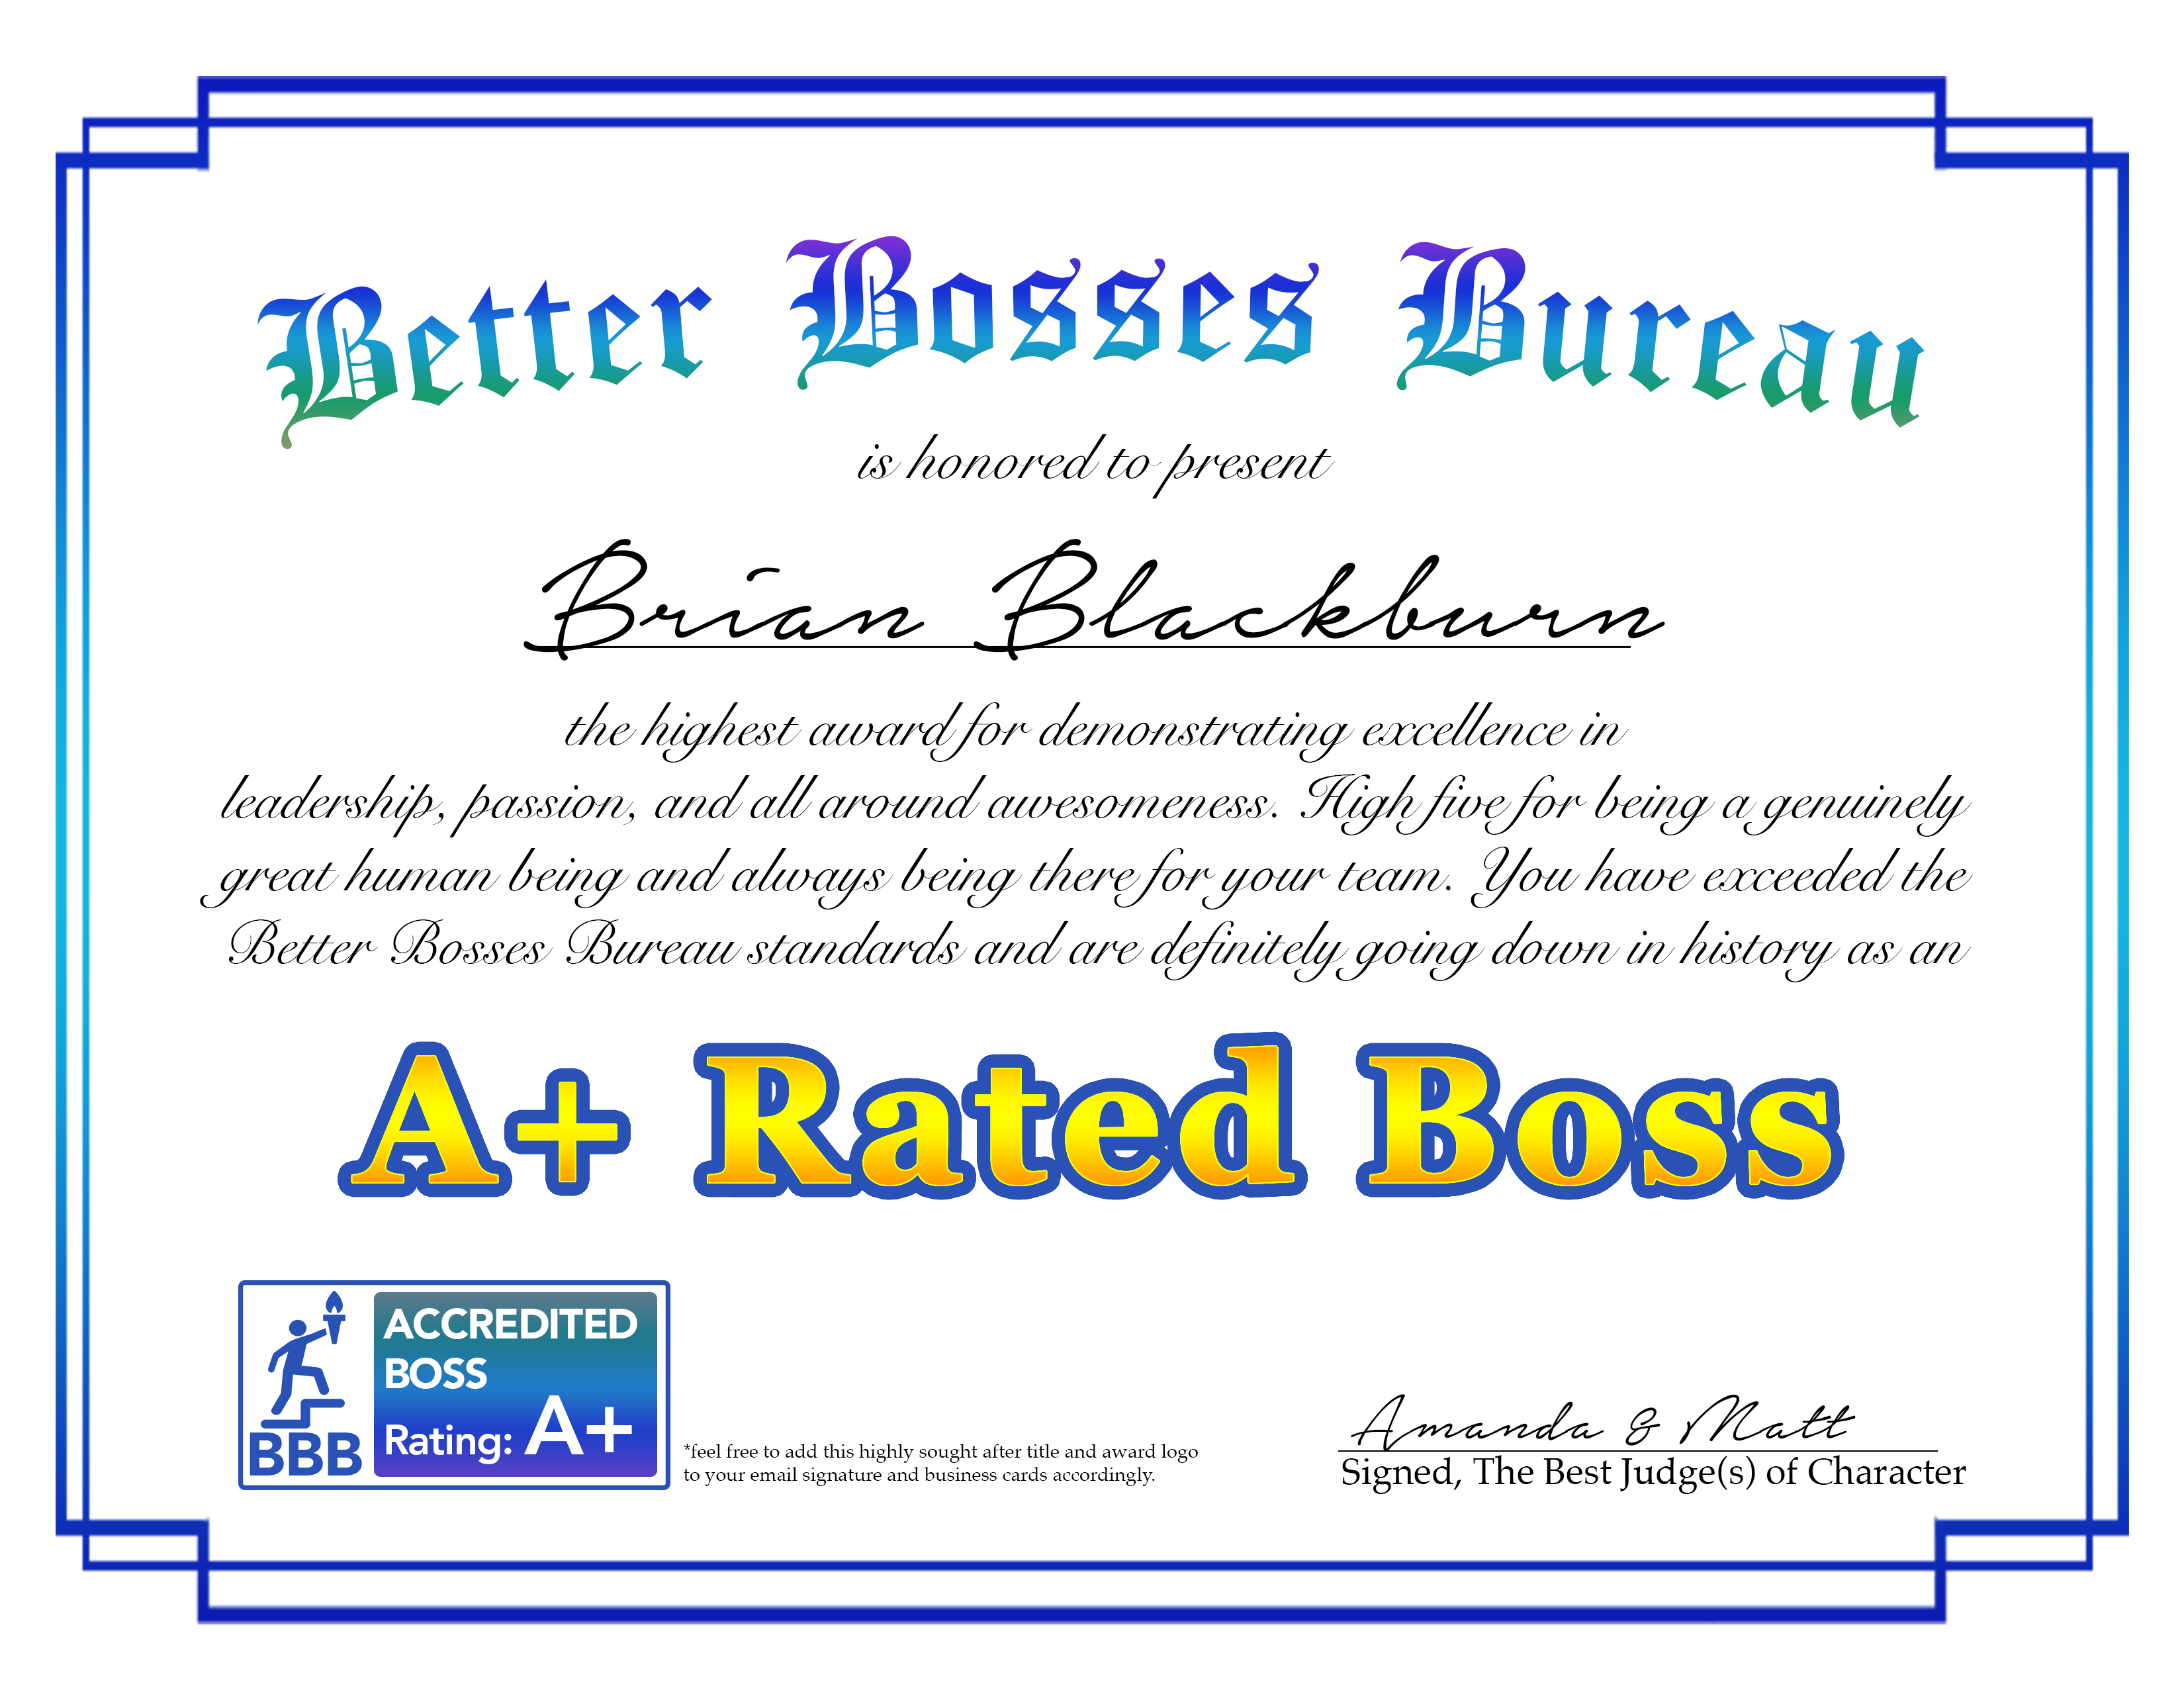 bbb-a-certification-award-final-bosses-day-bosss-day-gift-certificate-of-awesome-a-boss